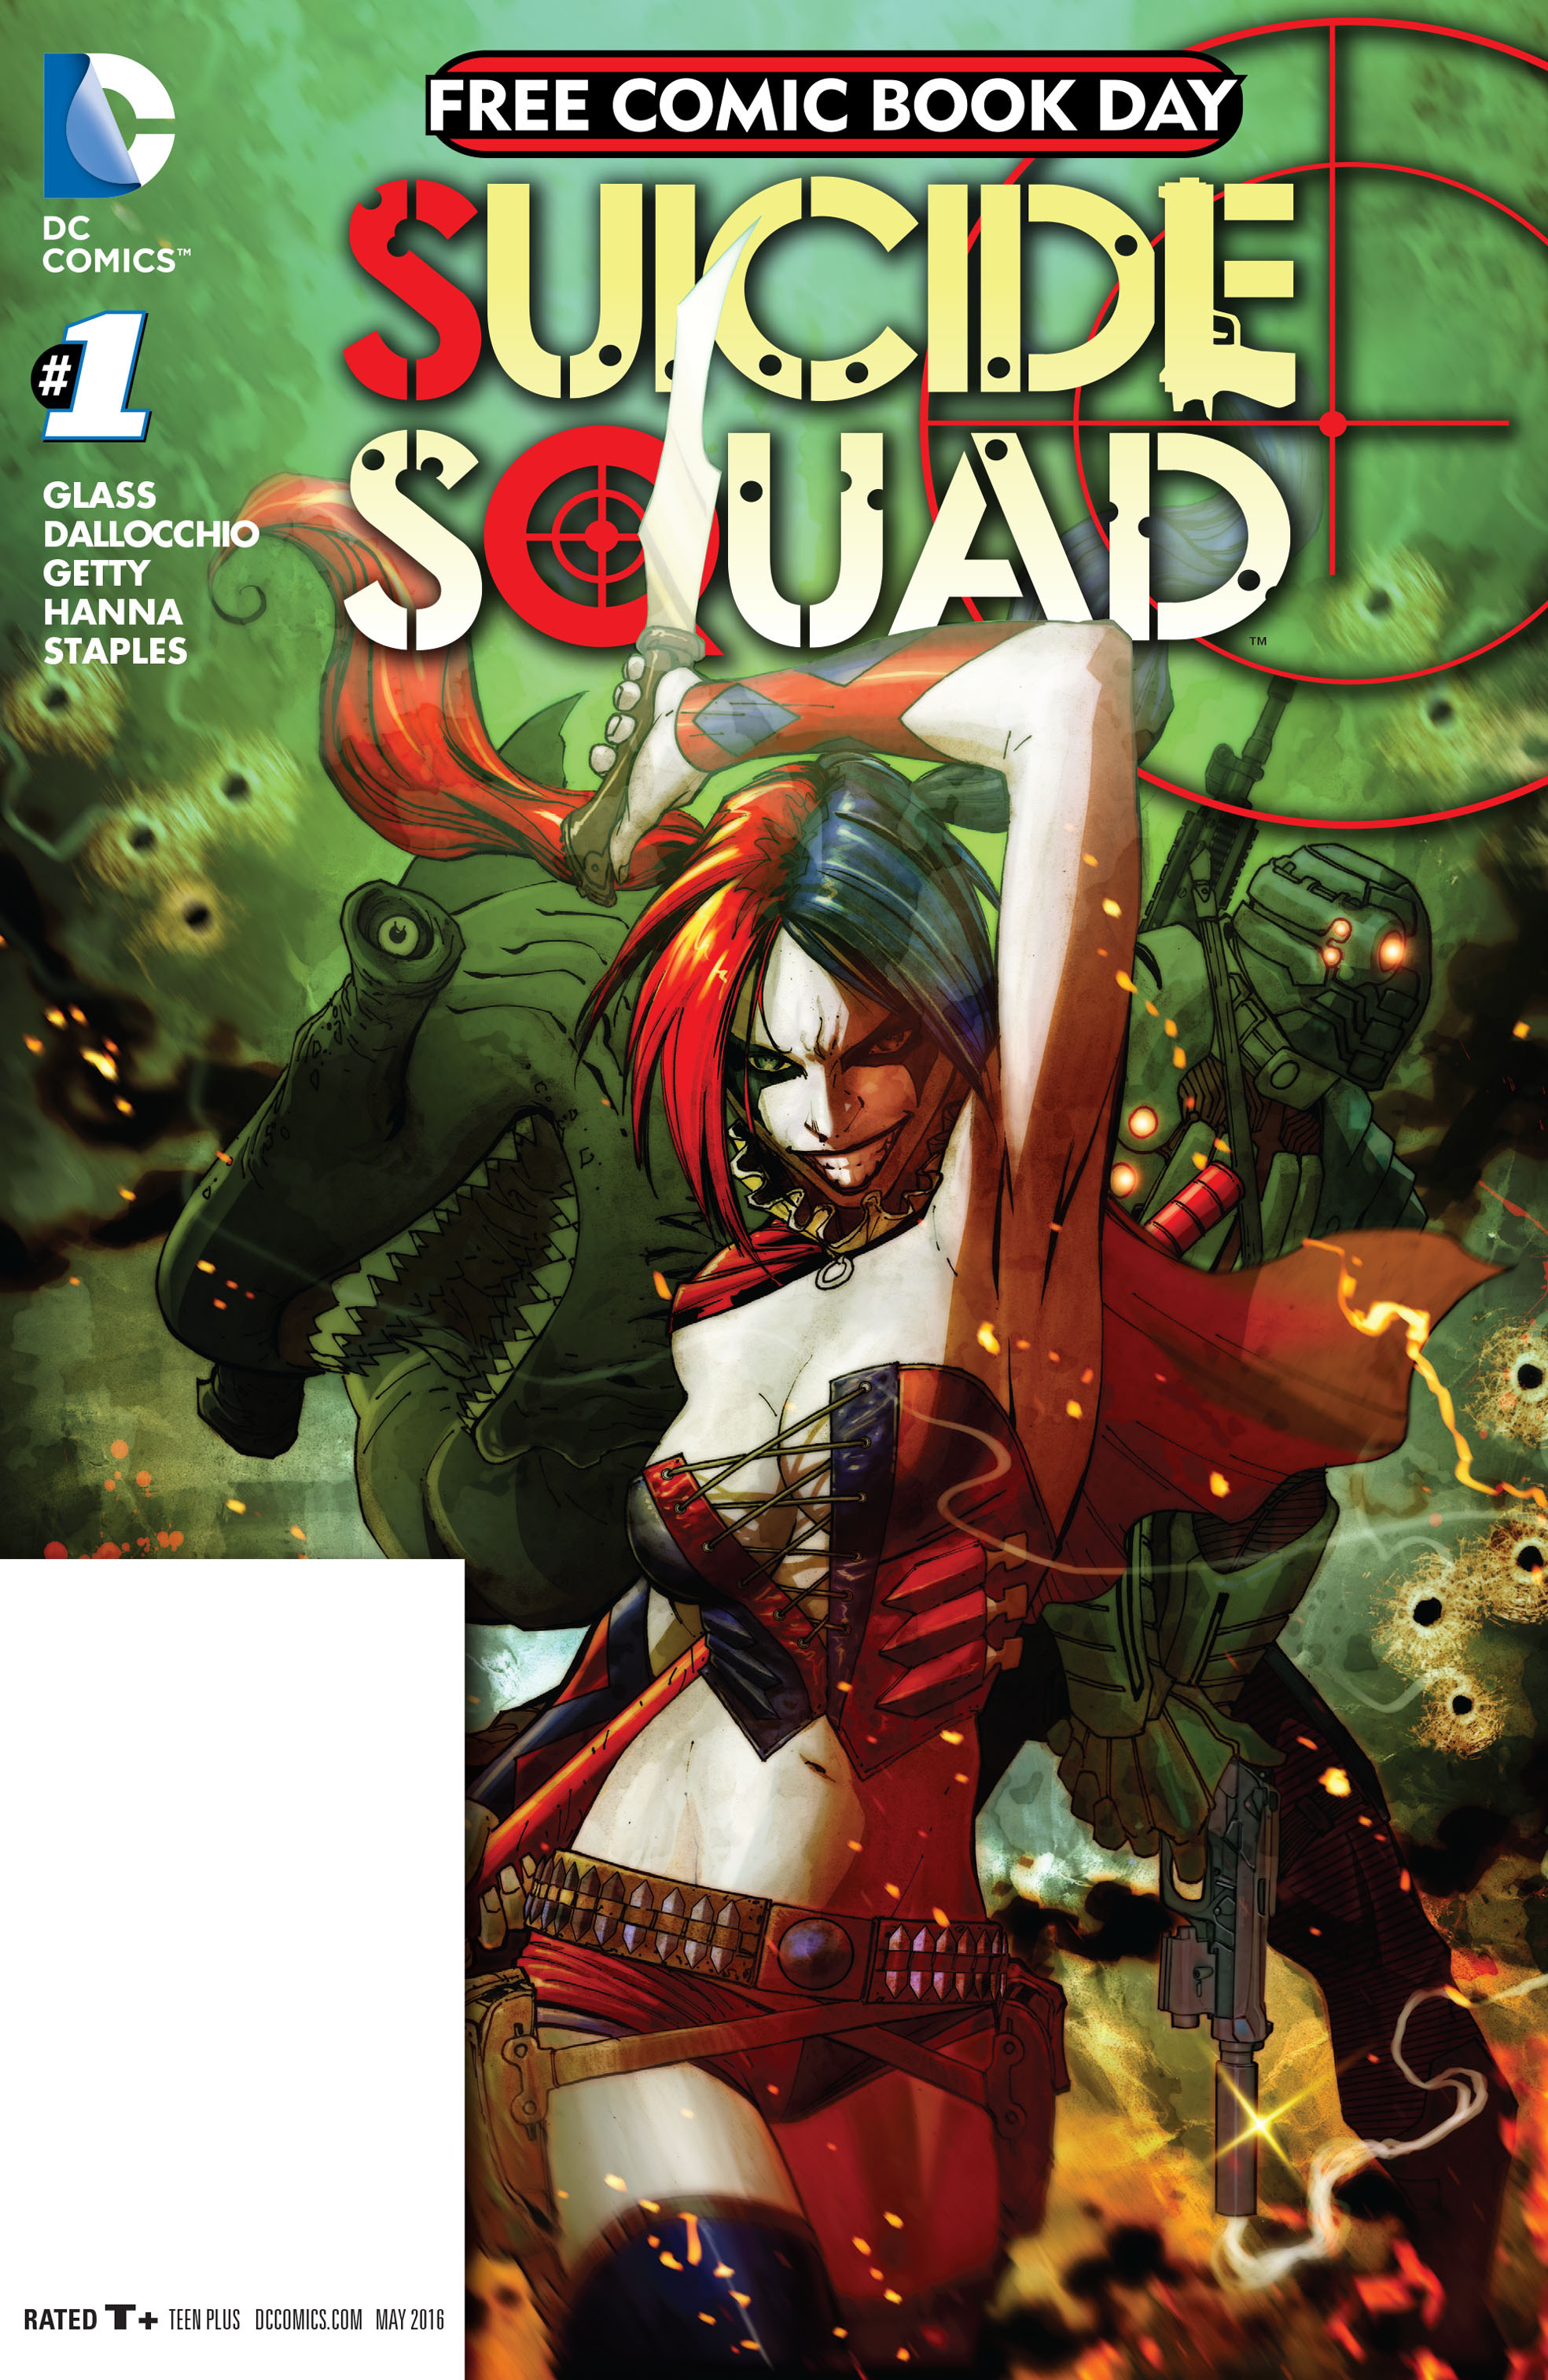 Read online Free Comic Book Day 2016 comic -  Issue # Suicide Squad - 1